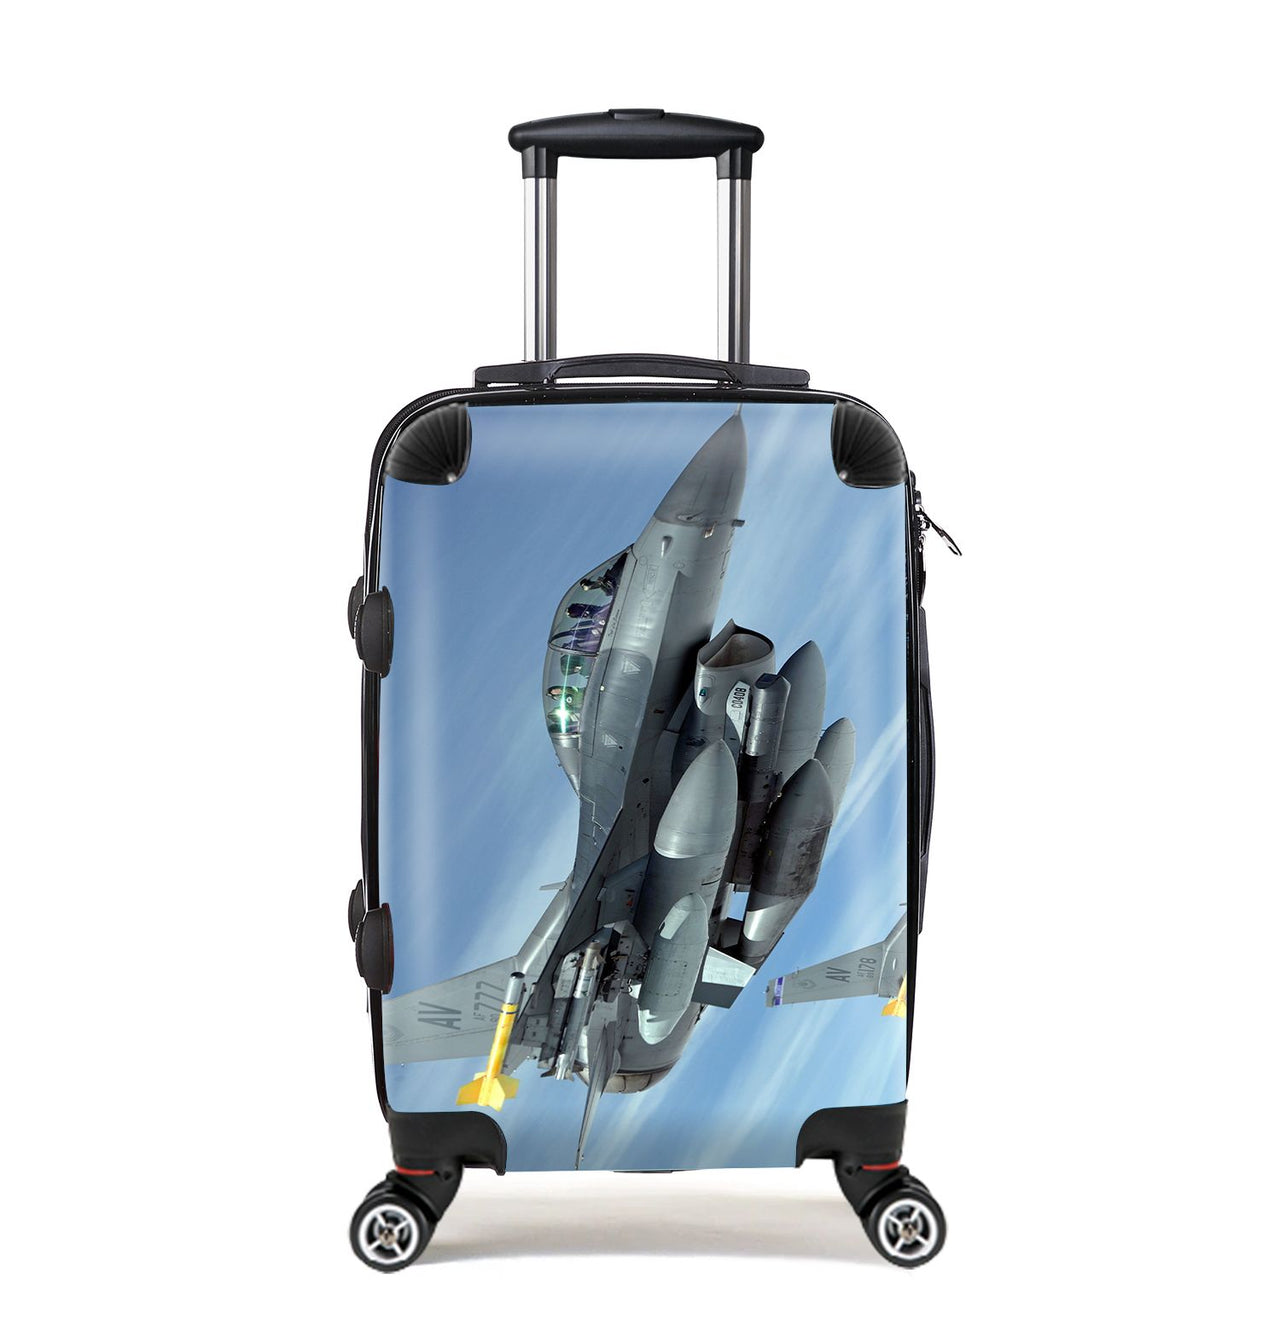 Two Fighting Falcon Designed Cabin Size Luggages